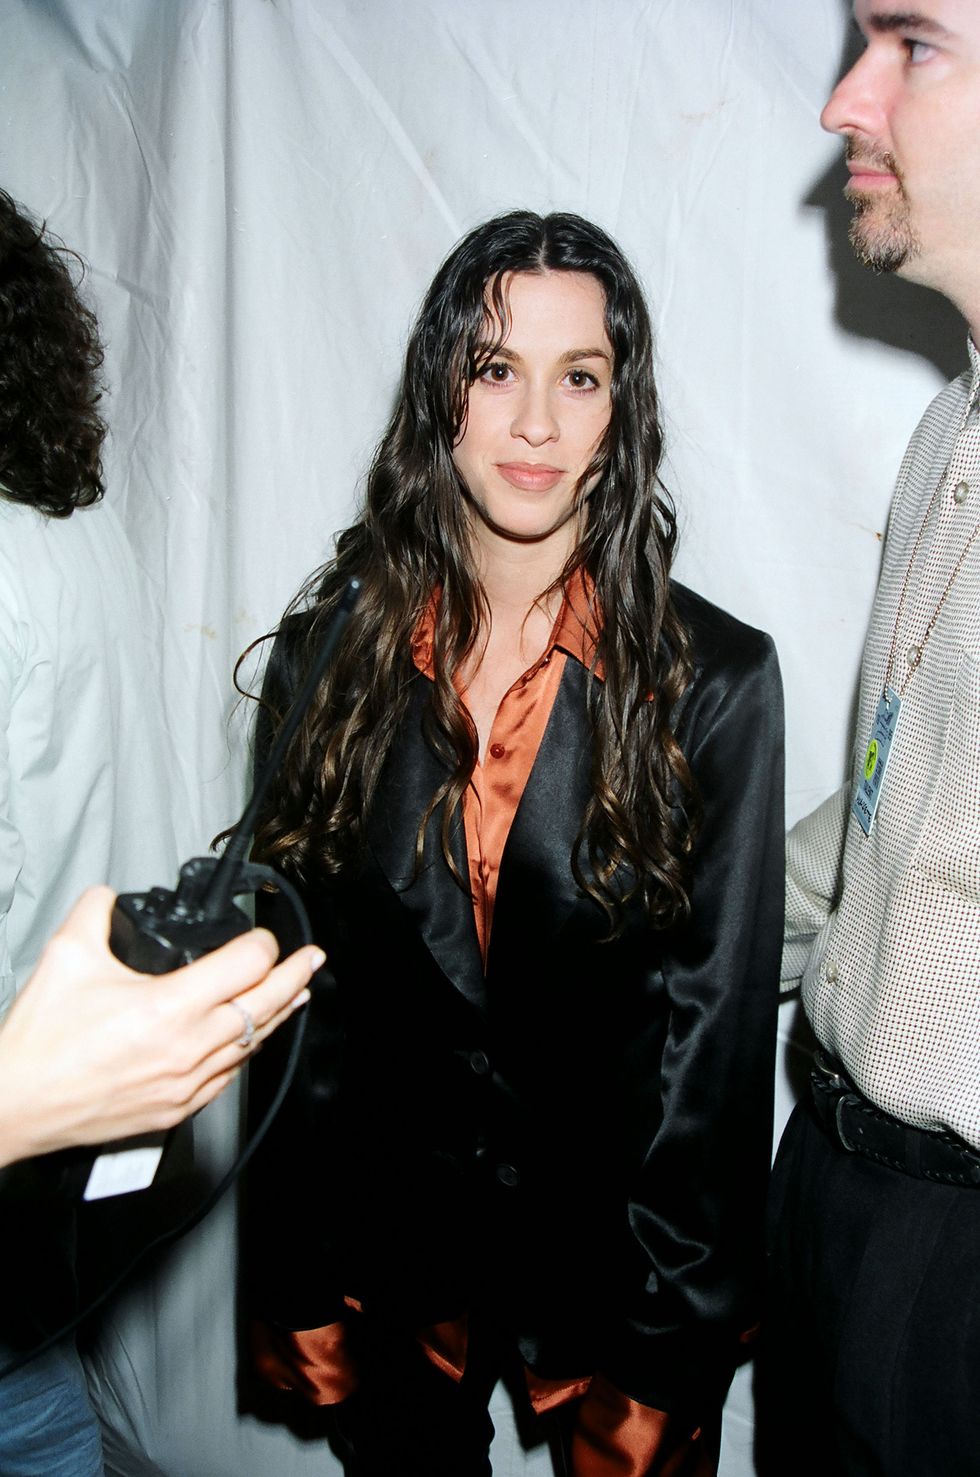 alanis morissette during 1995 mtv video music awards show at radio city music hall in new york city, new york, united states photo by jeff kravitzfilmmagic, inc